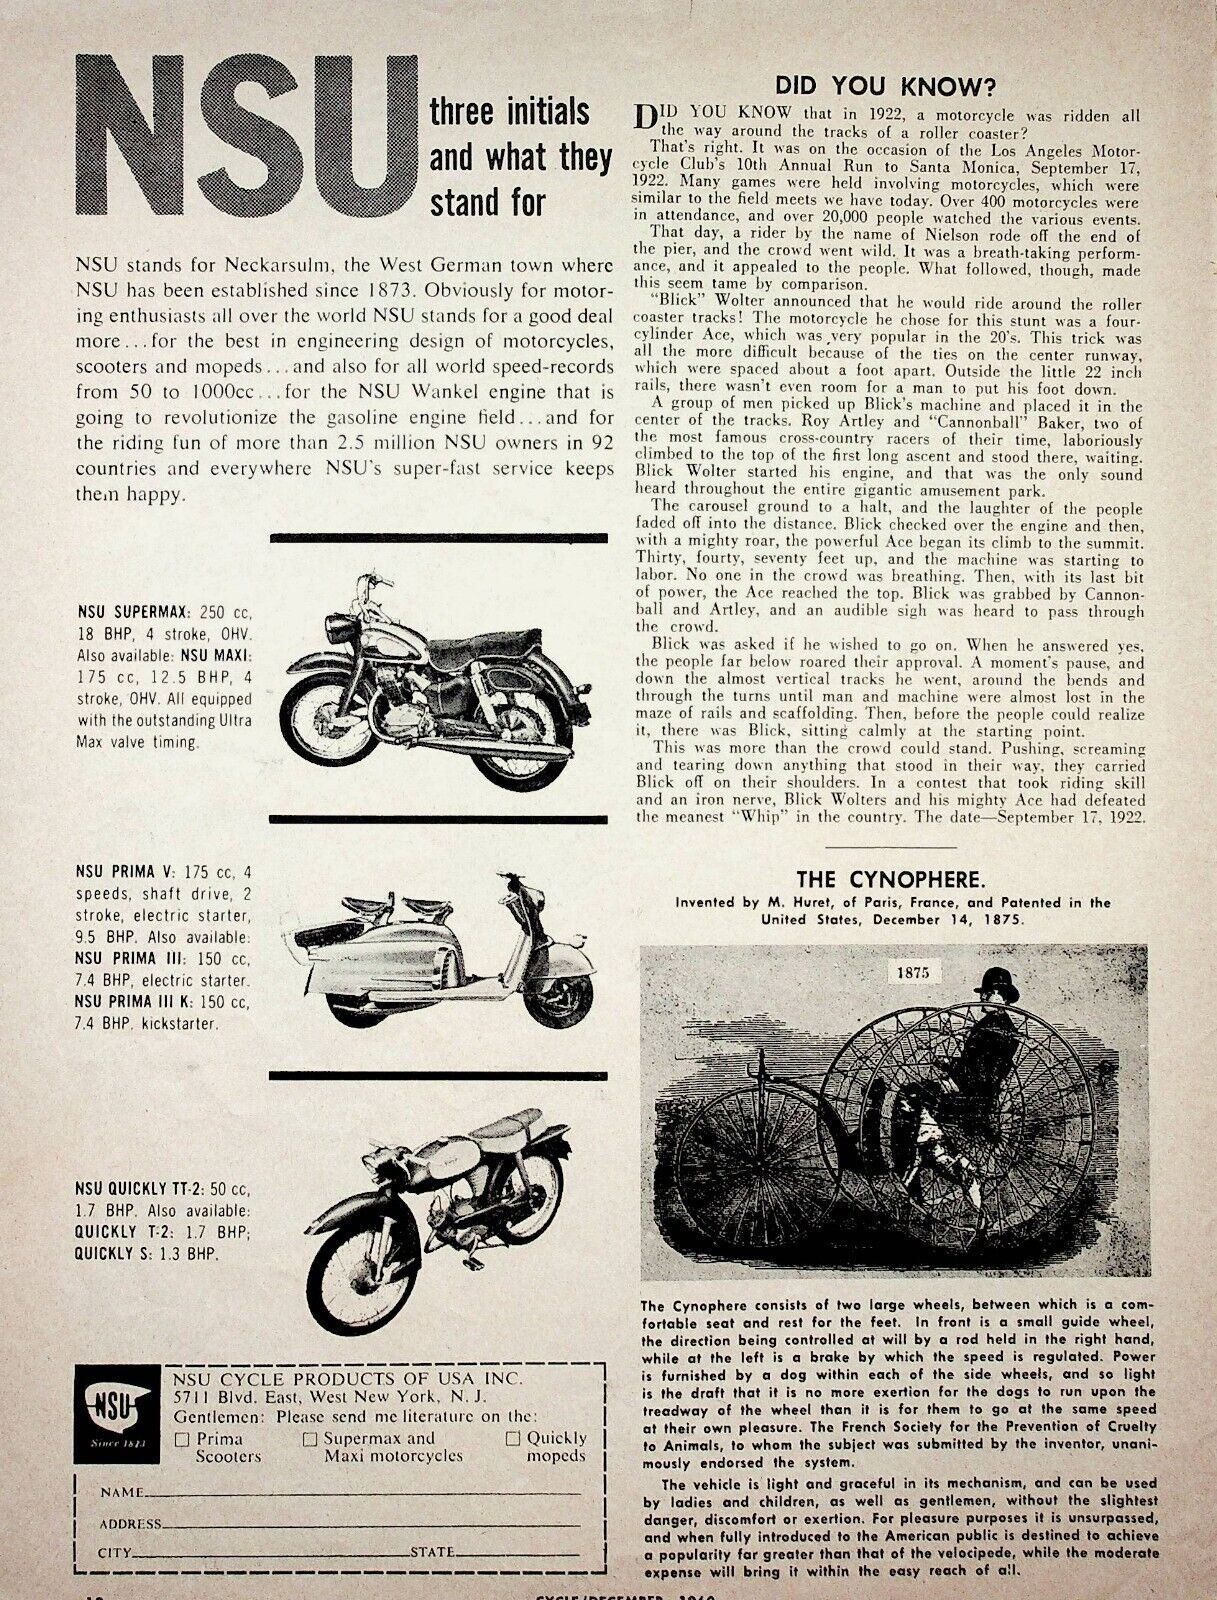 1960 NSU Supermax Cynophere Blick Wolter Roller Coaster - Vintage Motorcycle Ad